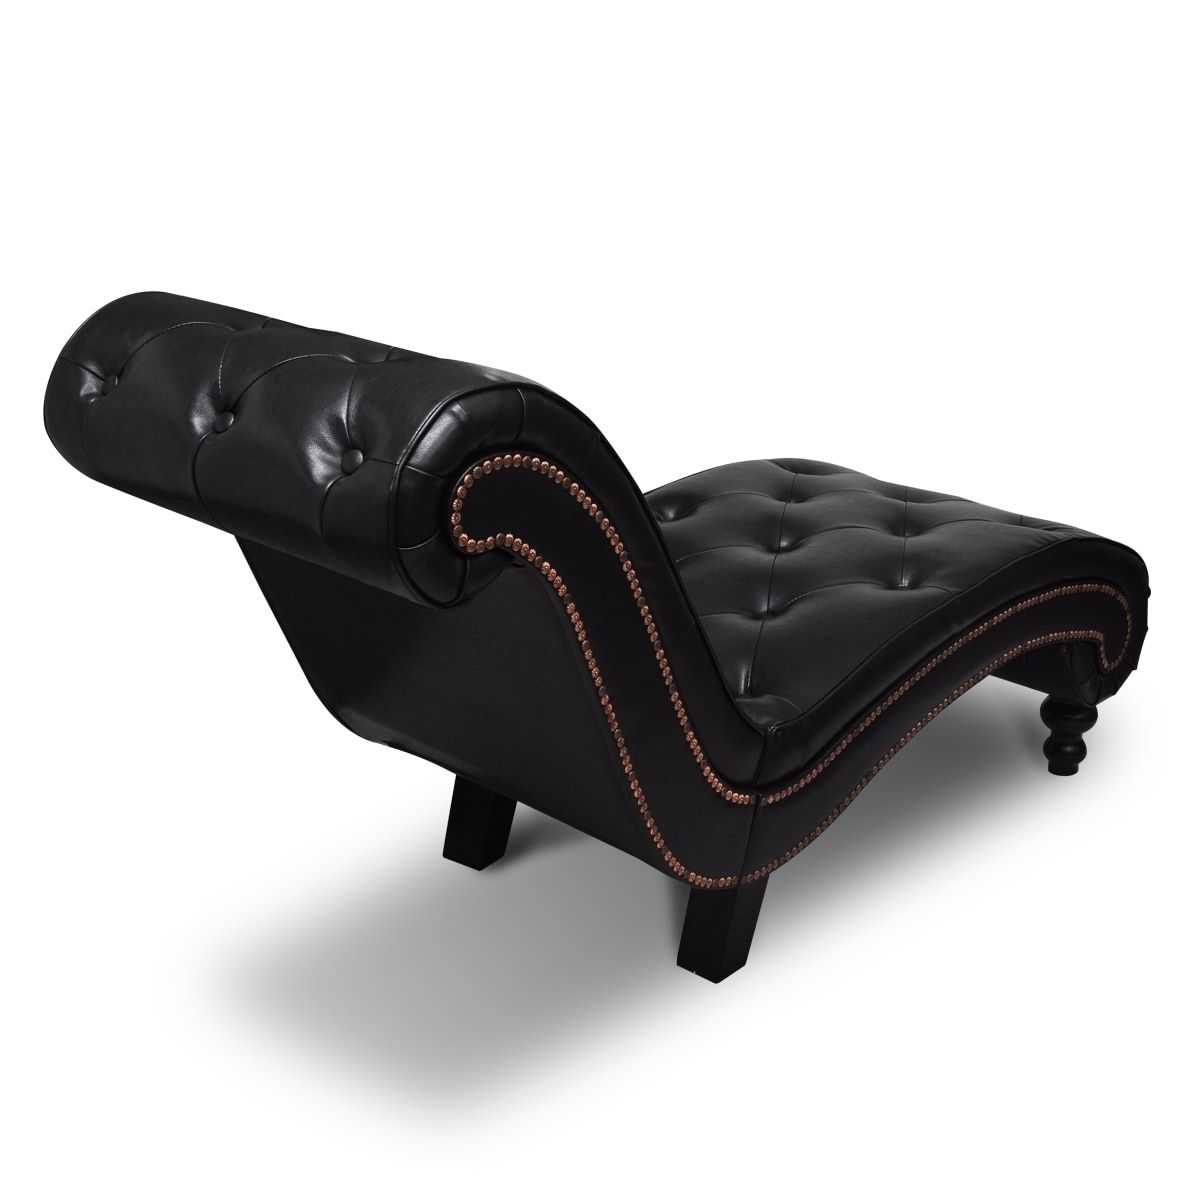 Preferred Brown Chaise Lounges Pertaining To Vidaxl Chesterfield Brown Chaise Lounge Button Tufted – Free (View 14 of 15)